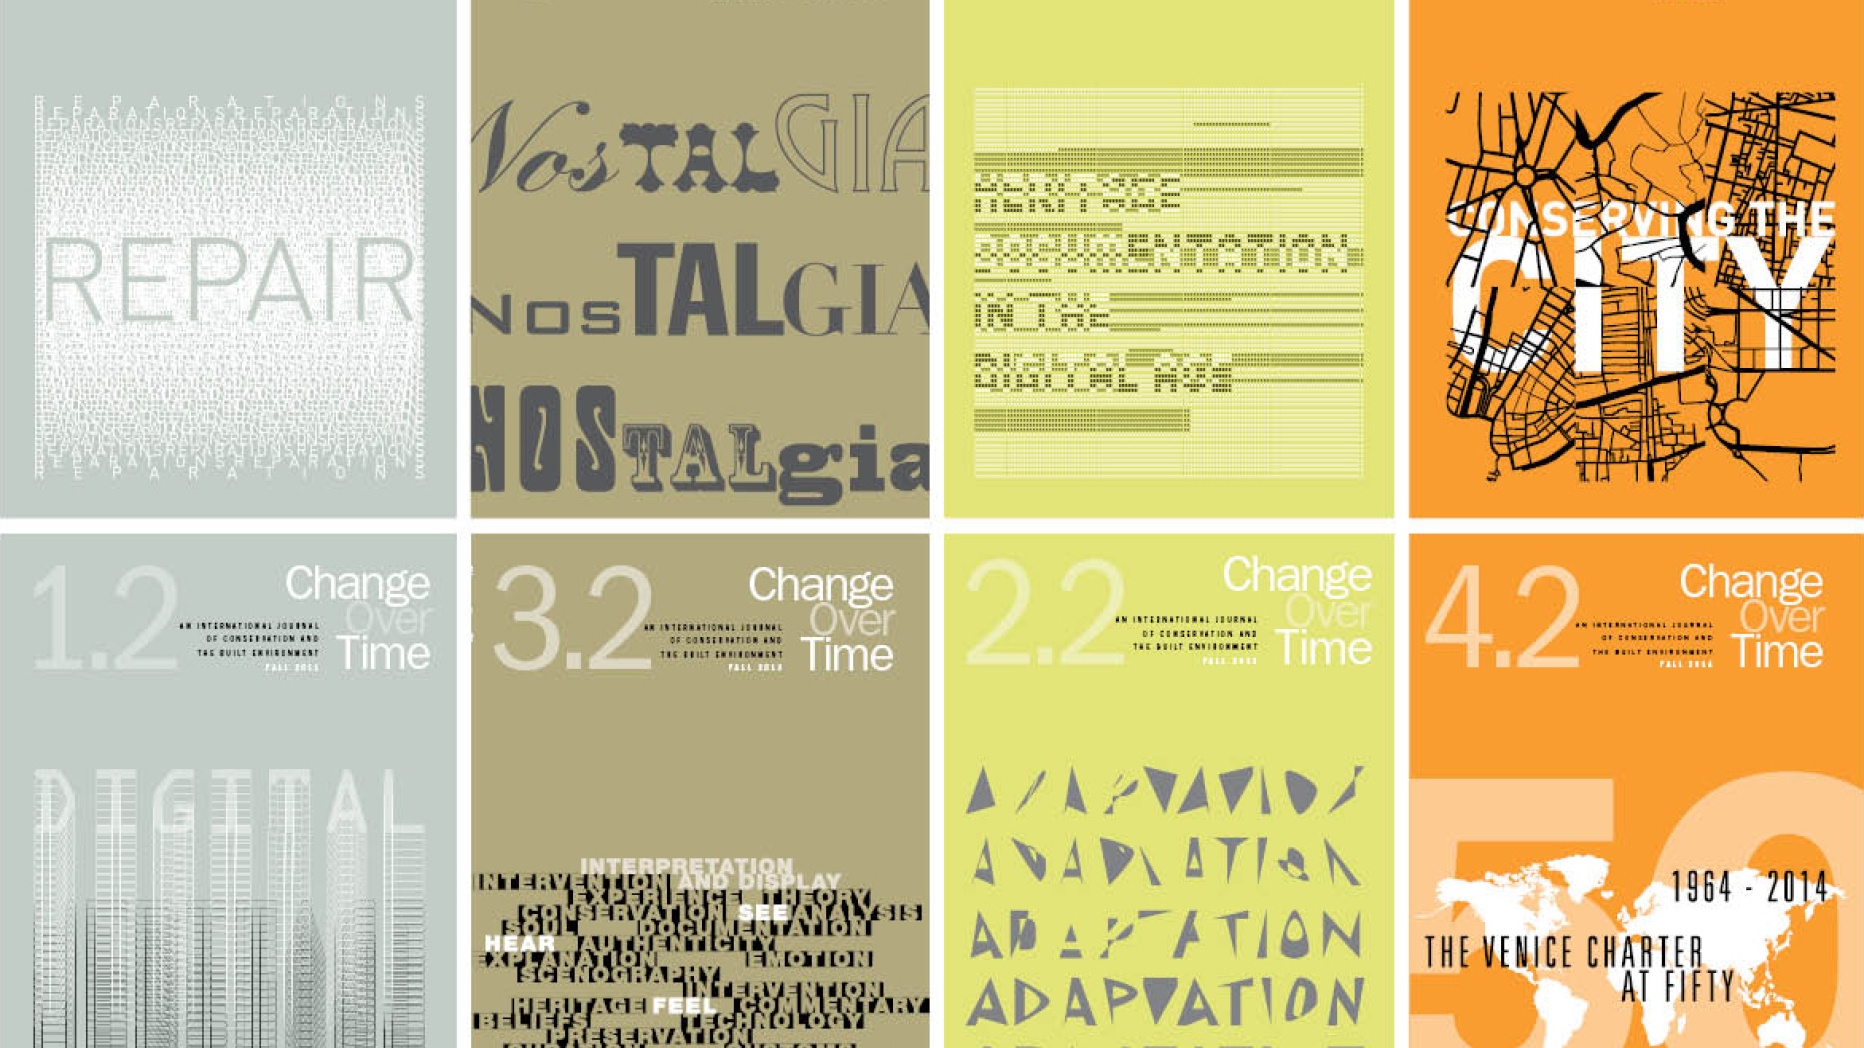 Covers for publication Change Over Time editions 1.1-4.2